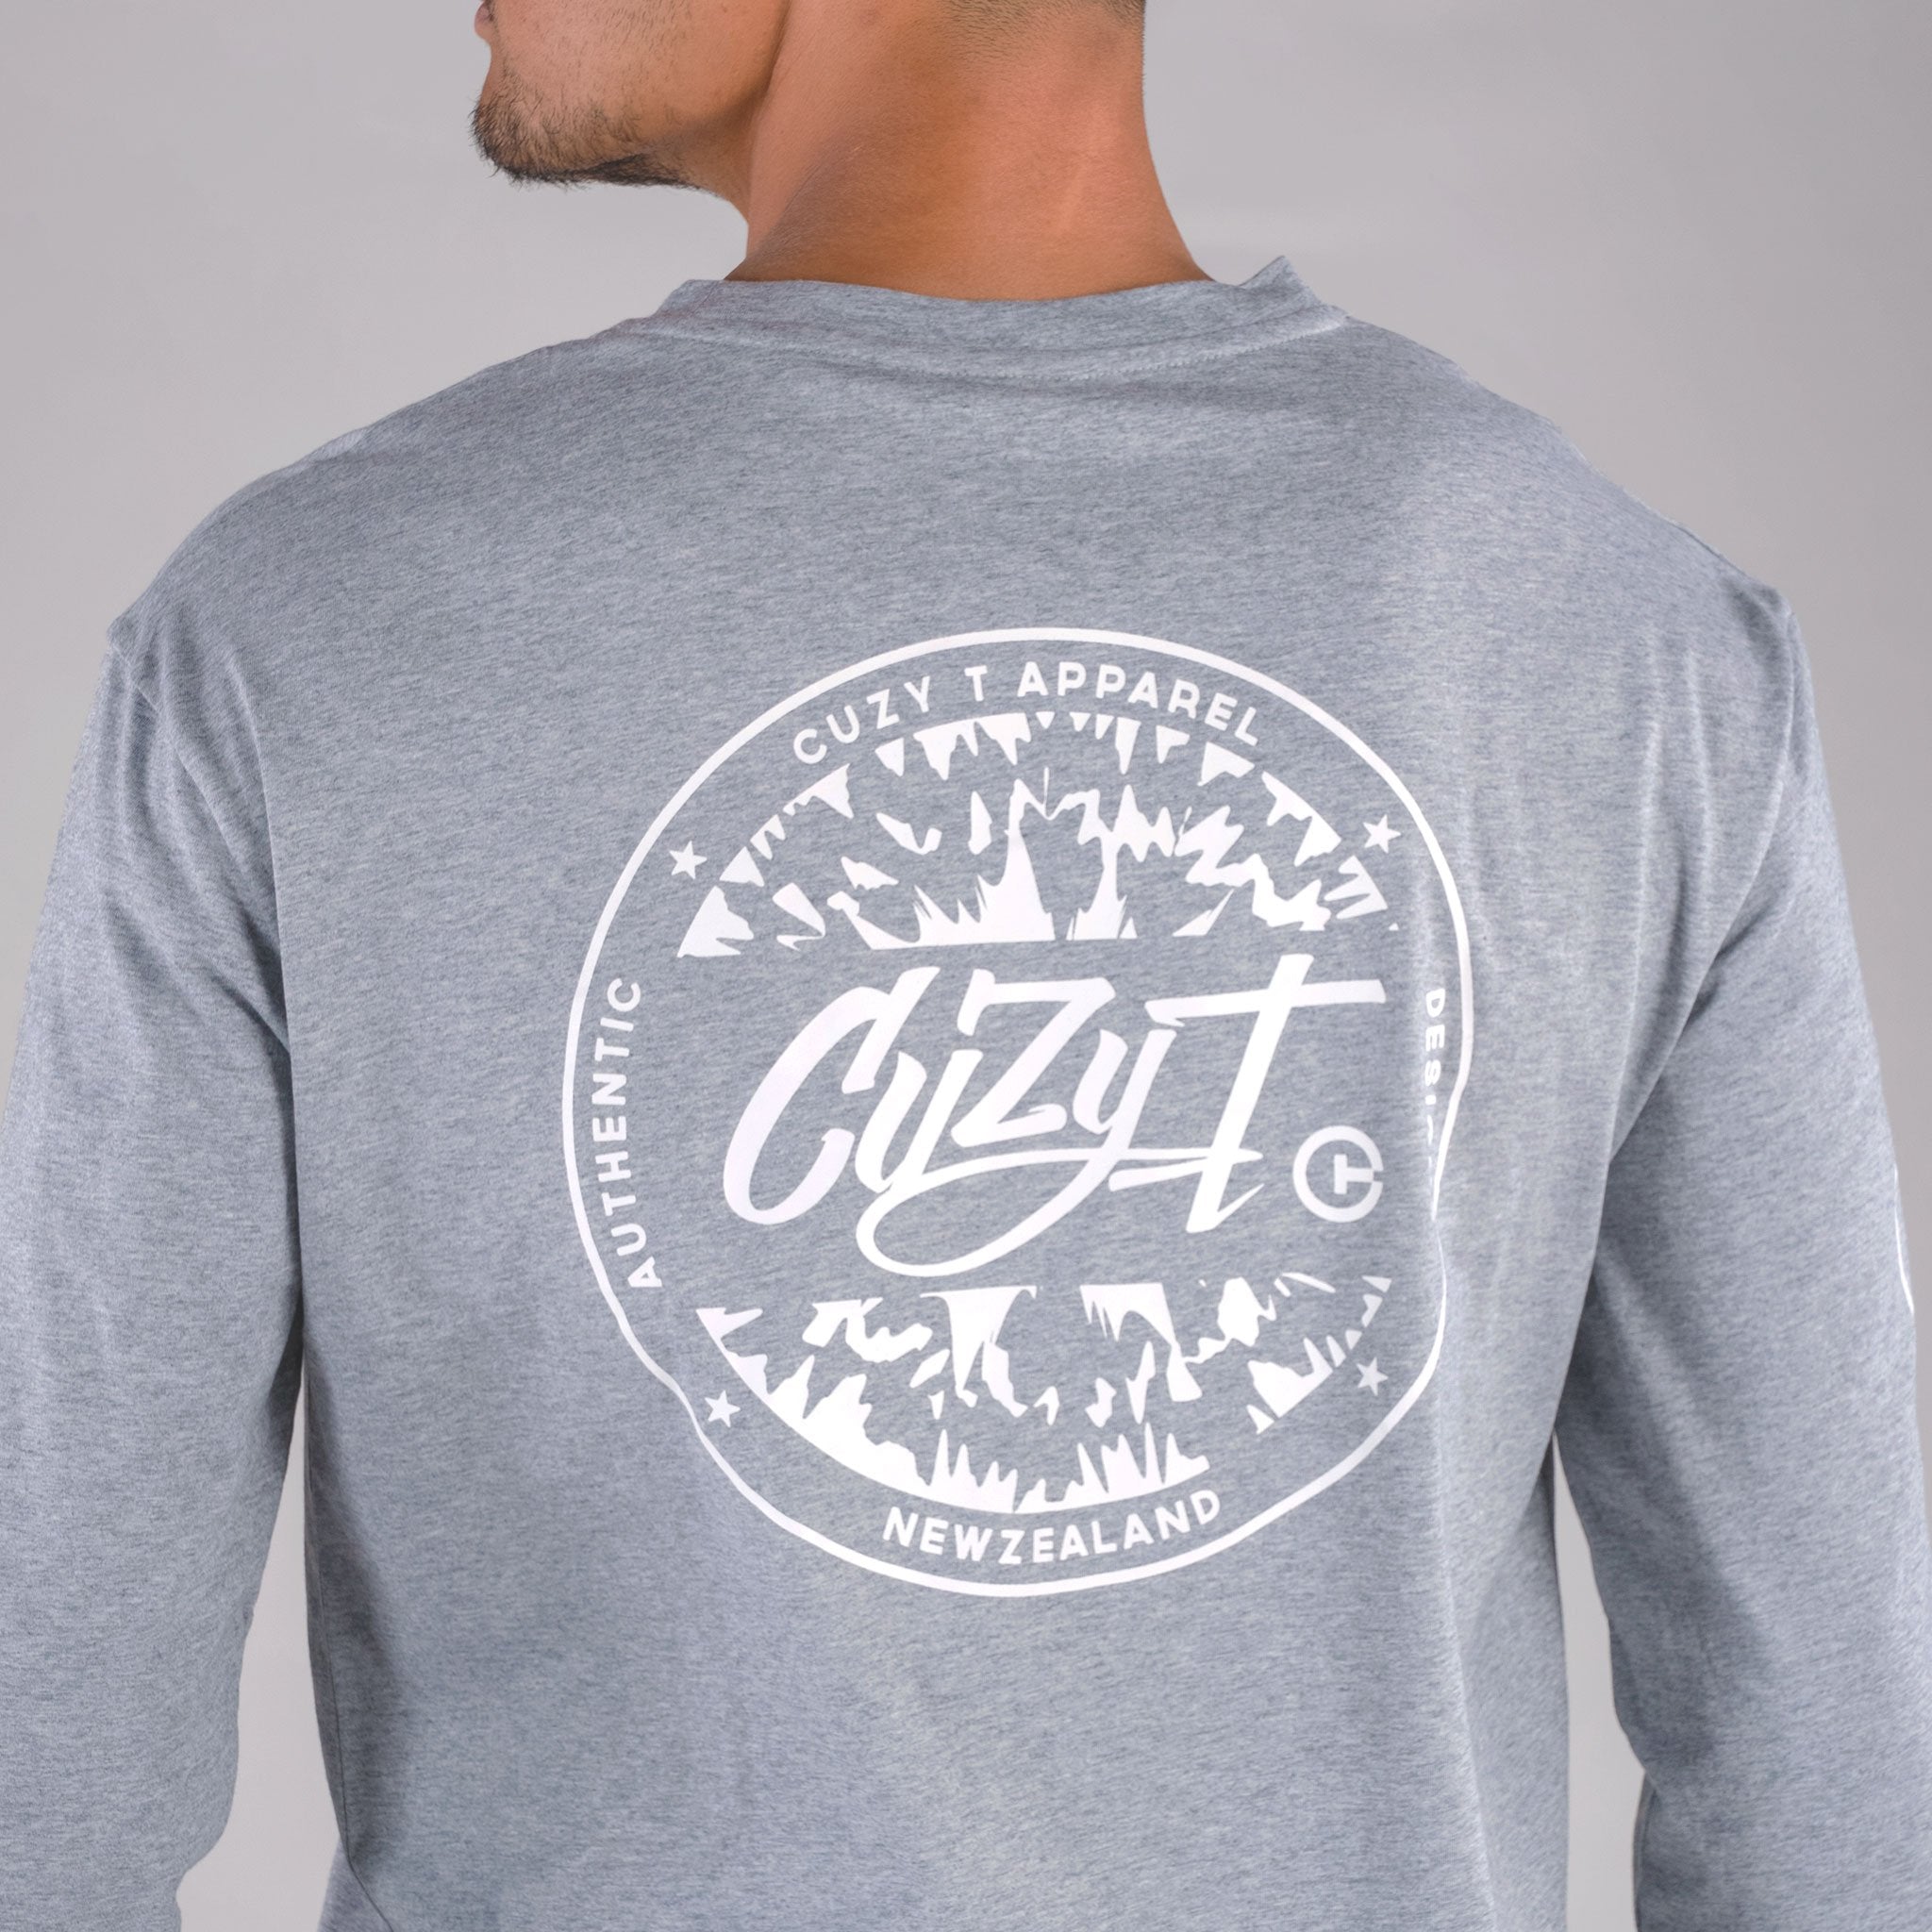 ICONIC LONG SLEEVE TAIL TEE GREY - Cuzy T Apparel